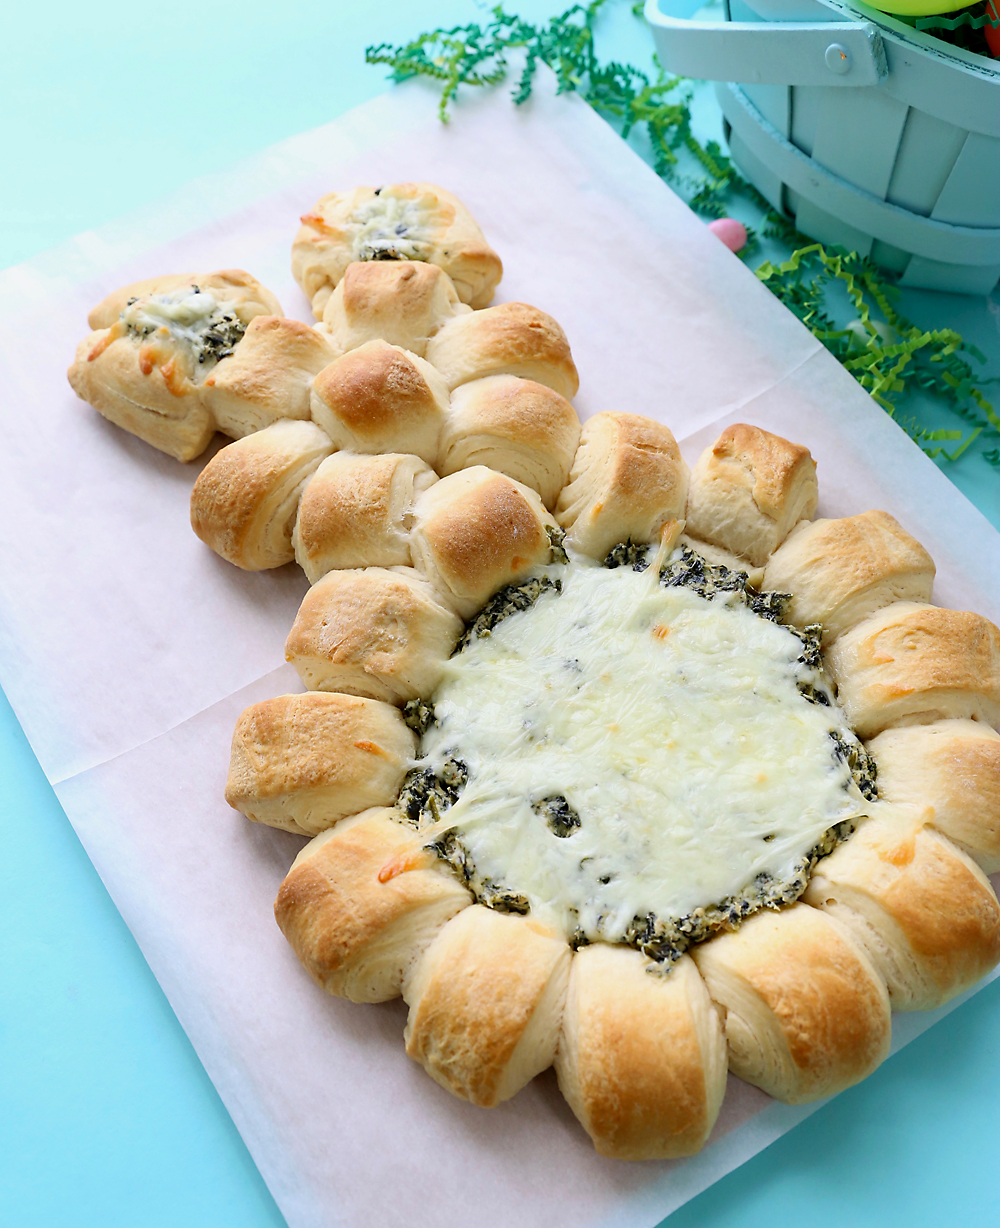 Easter bunny spinach dip appetizer, made with rolls in a bunny shape with spinach dip in the center